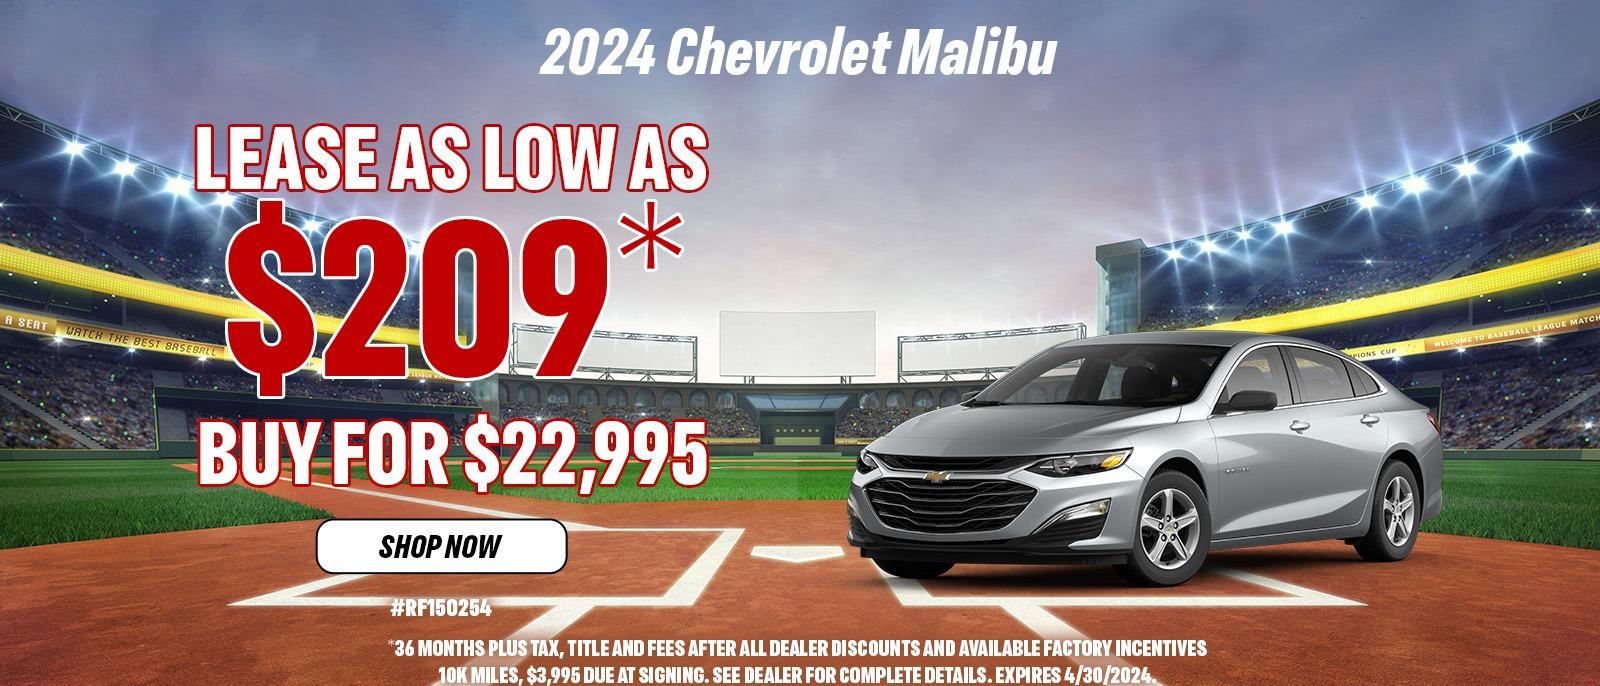 Lease A 2024 Malibu For As Low As $209/month or Buy For $22,995